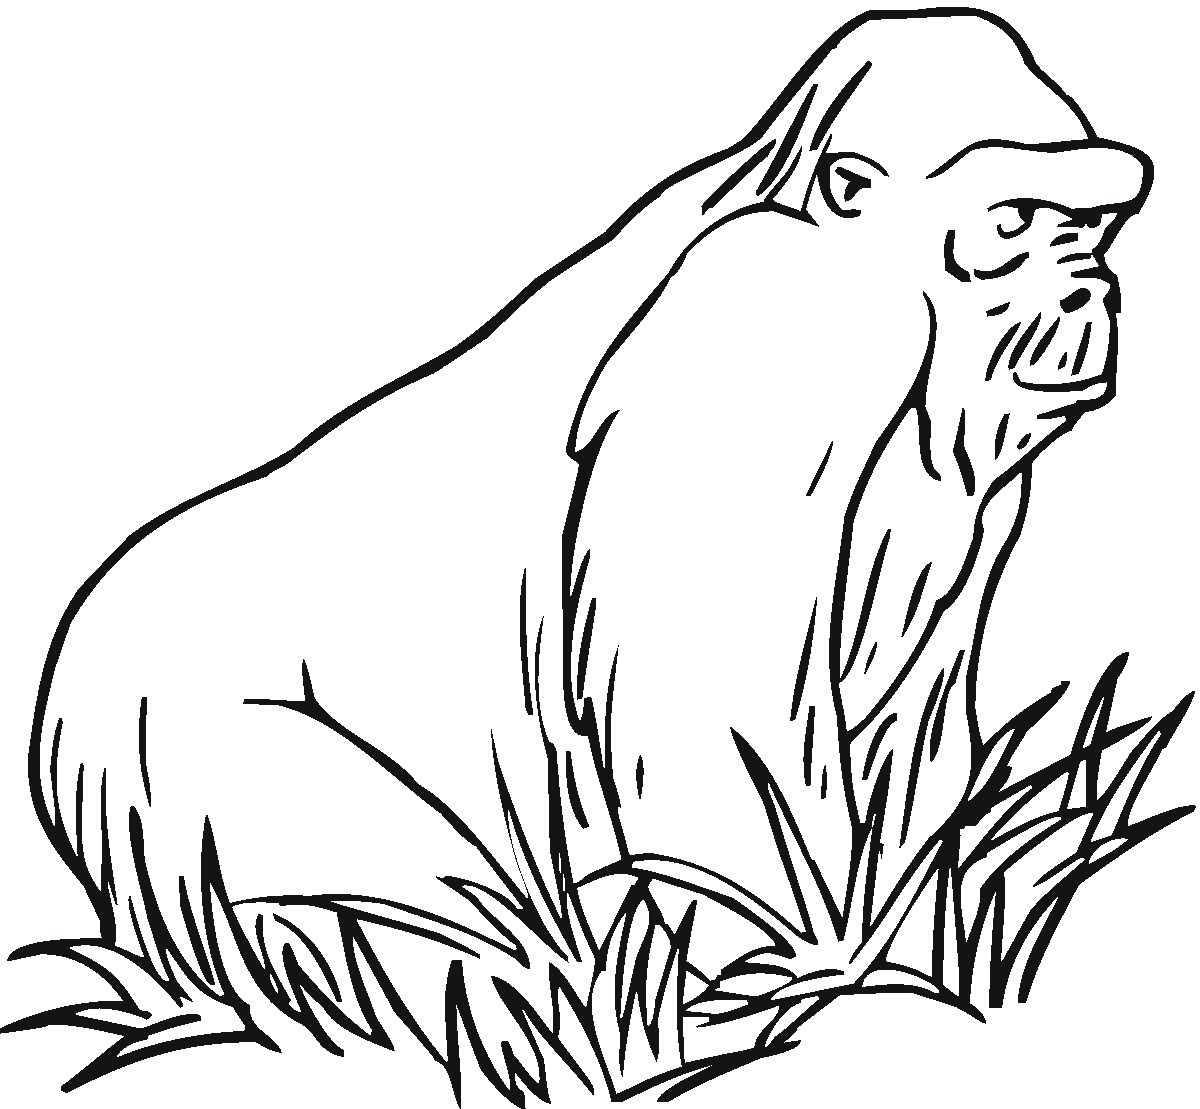 Coloring Pages Of Grass - ClipArt Best